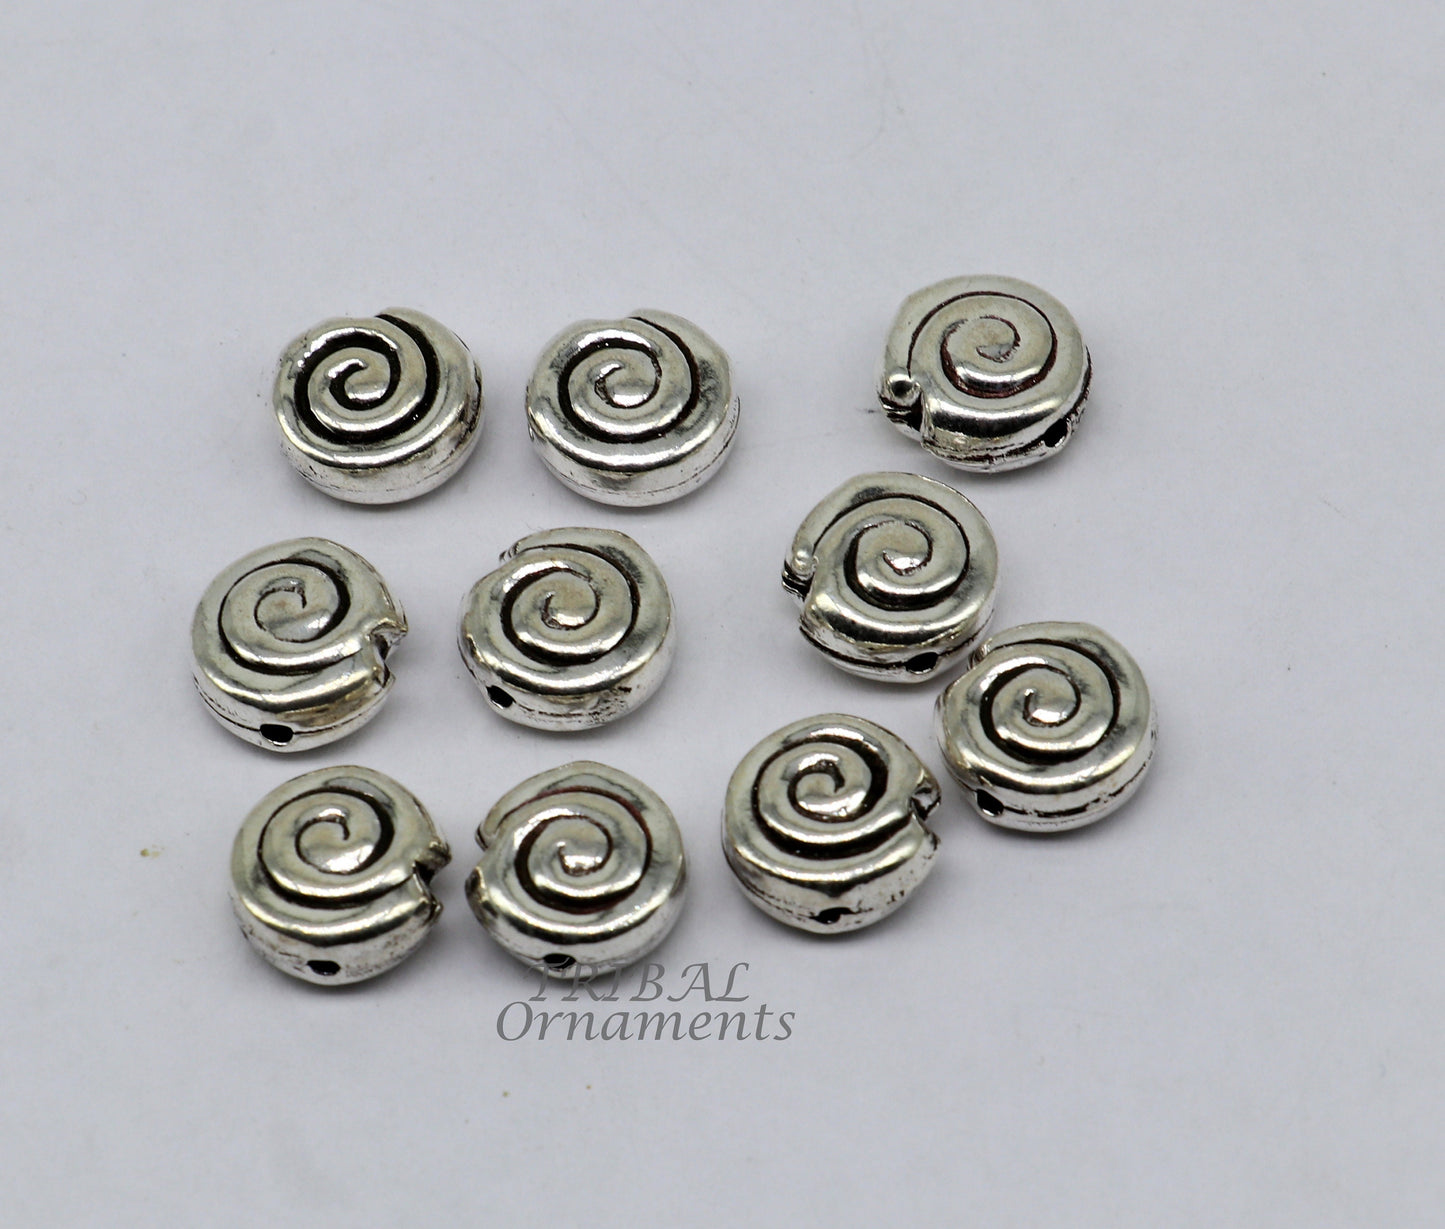 12 mm lot 10 pieces 925 sterling silver fabulous beads drops for custom jewelry making lose beads bd23 - TRIBAL ORNAMENTS